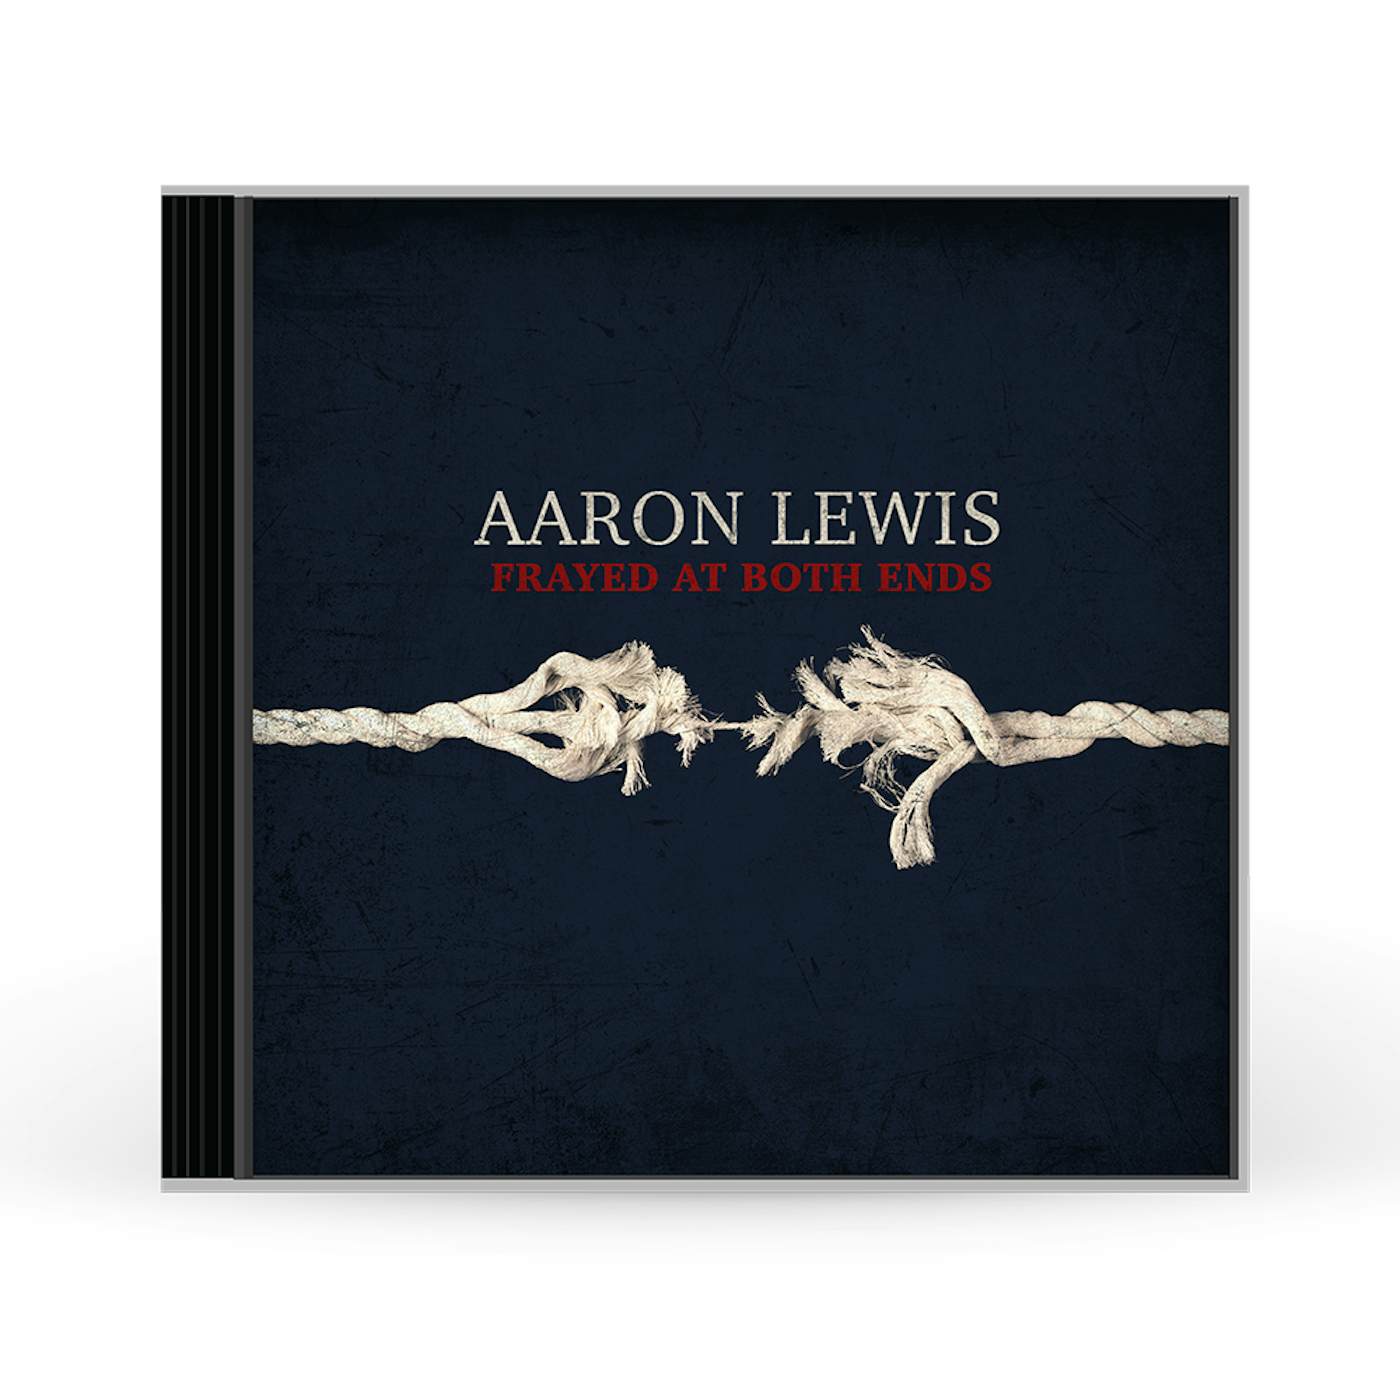 Aaron Lewis Frayed At Both Ends CD